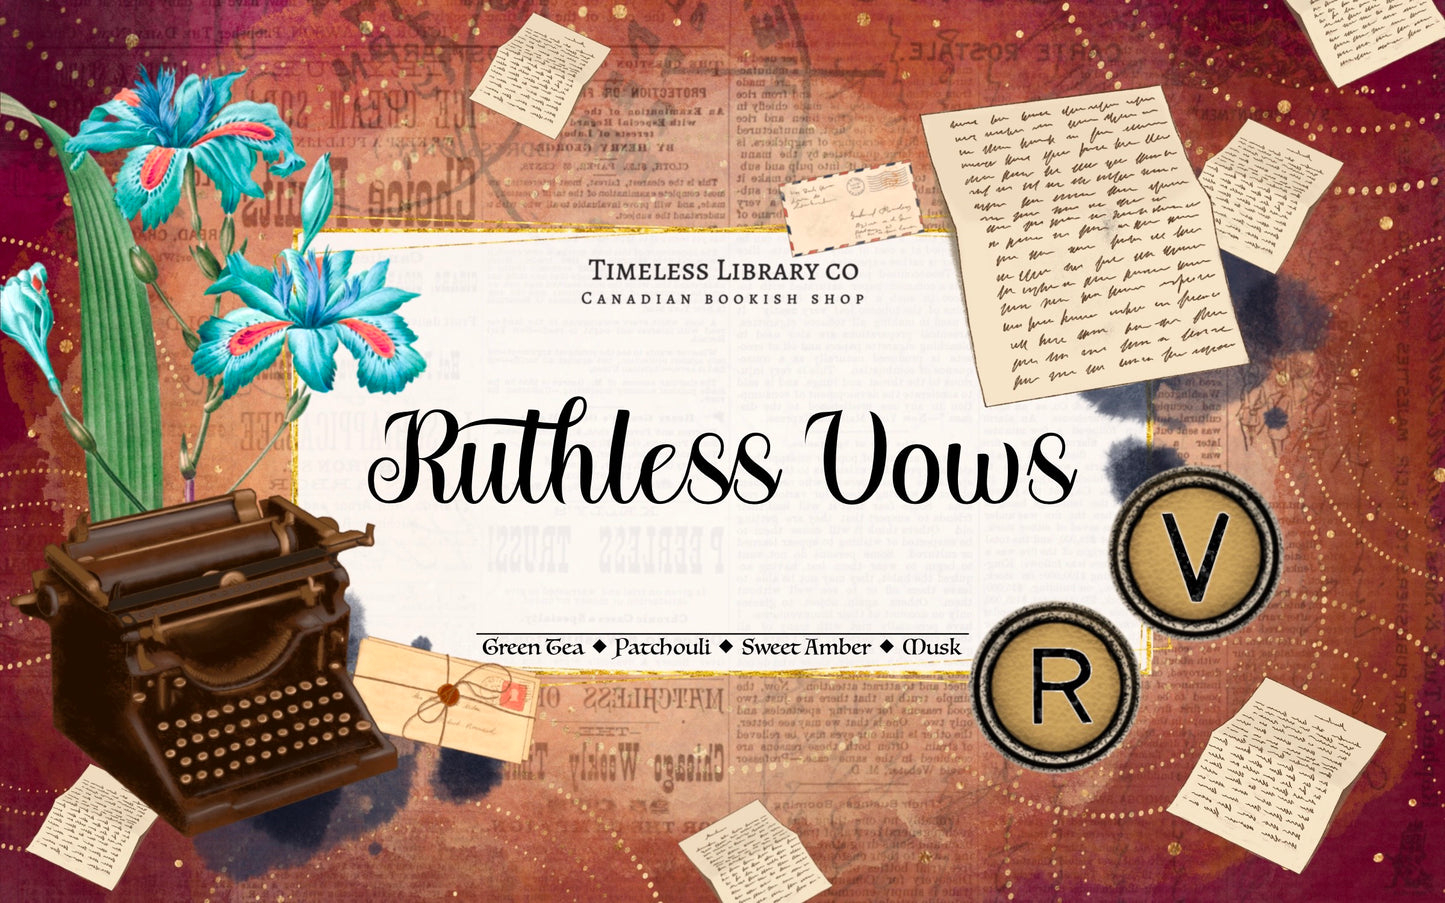 Rutheless Vows